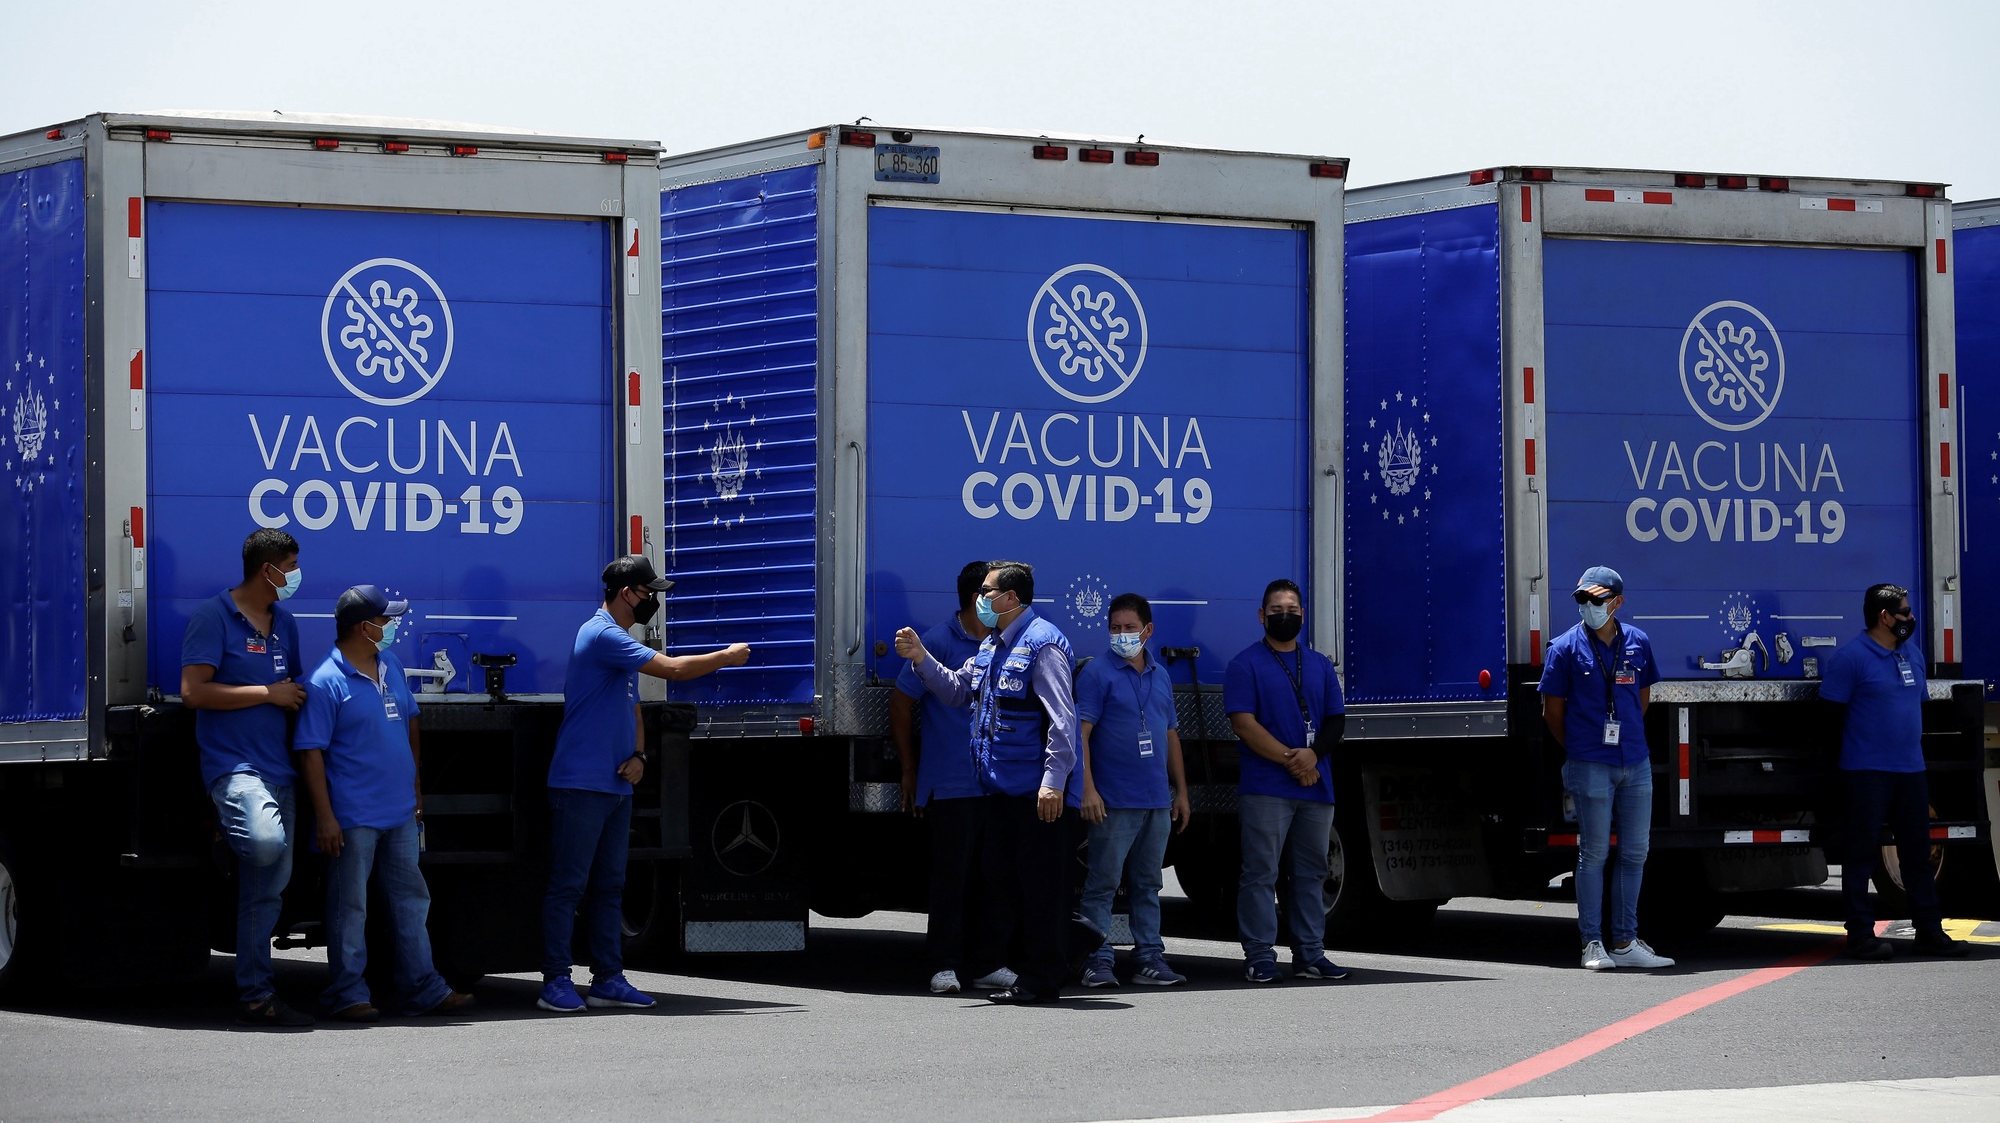 epa09358764 View of health workers next to the refrigerated trucks that will transport a batch of vaccines, sent by the United States, against COVID-19, at the San Ã“scar Romero International Airport in San Luis Talpa, El Salvador, 22 July 2021. The United States delivered a second batch of 1.5 million Modern vaccines against the SARS-CoV-2 coronavirus to El Salvador on Thursday, as part of a donation through the Covax system of the World Health Organization (WHO).  EPA/Rodrigo Sura